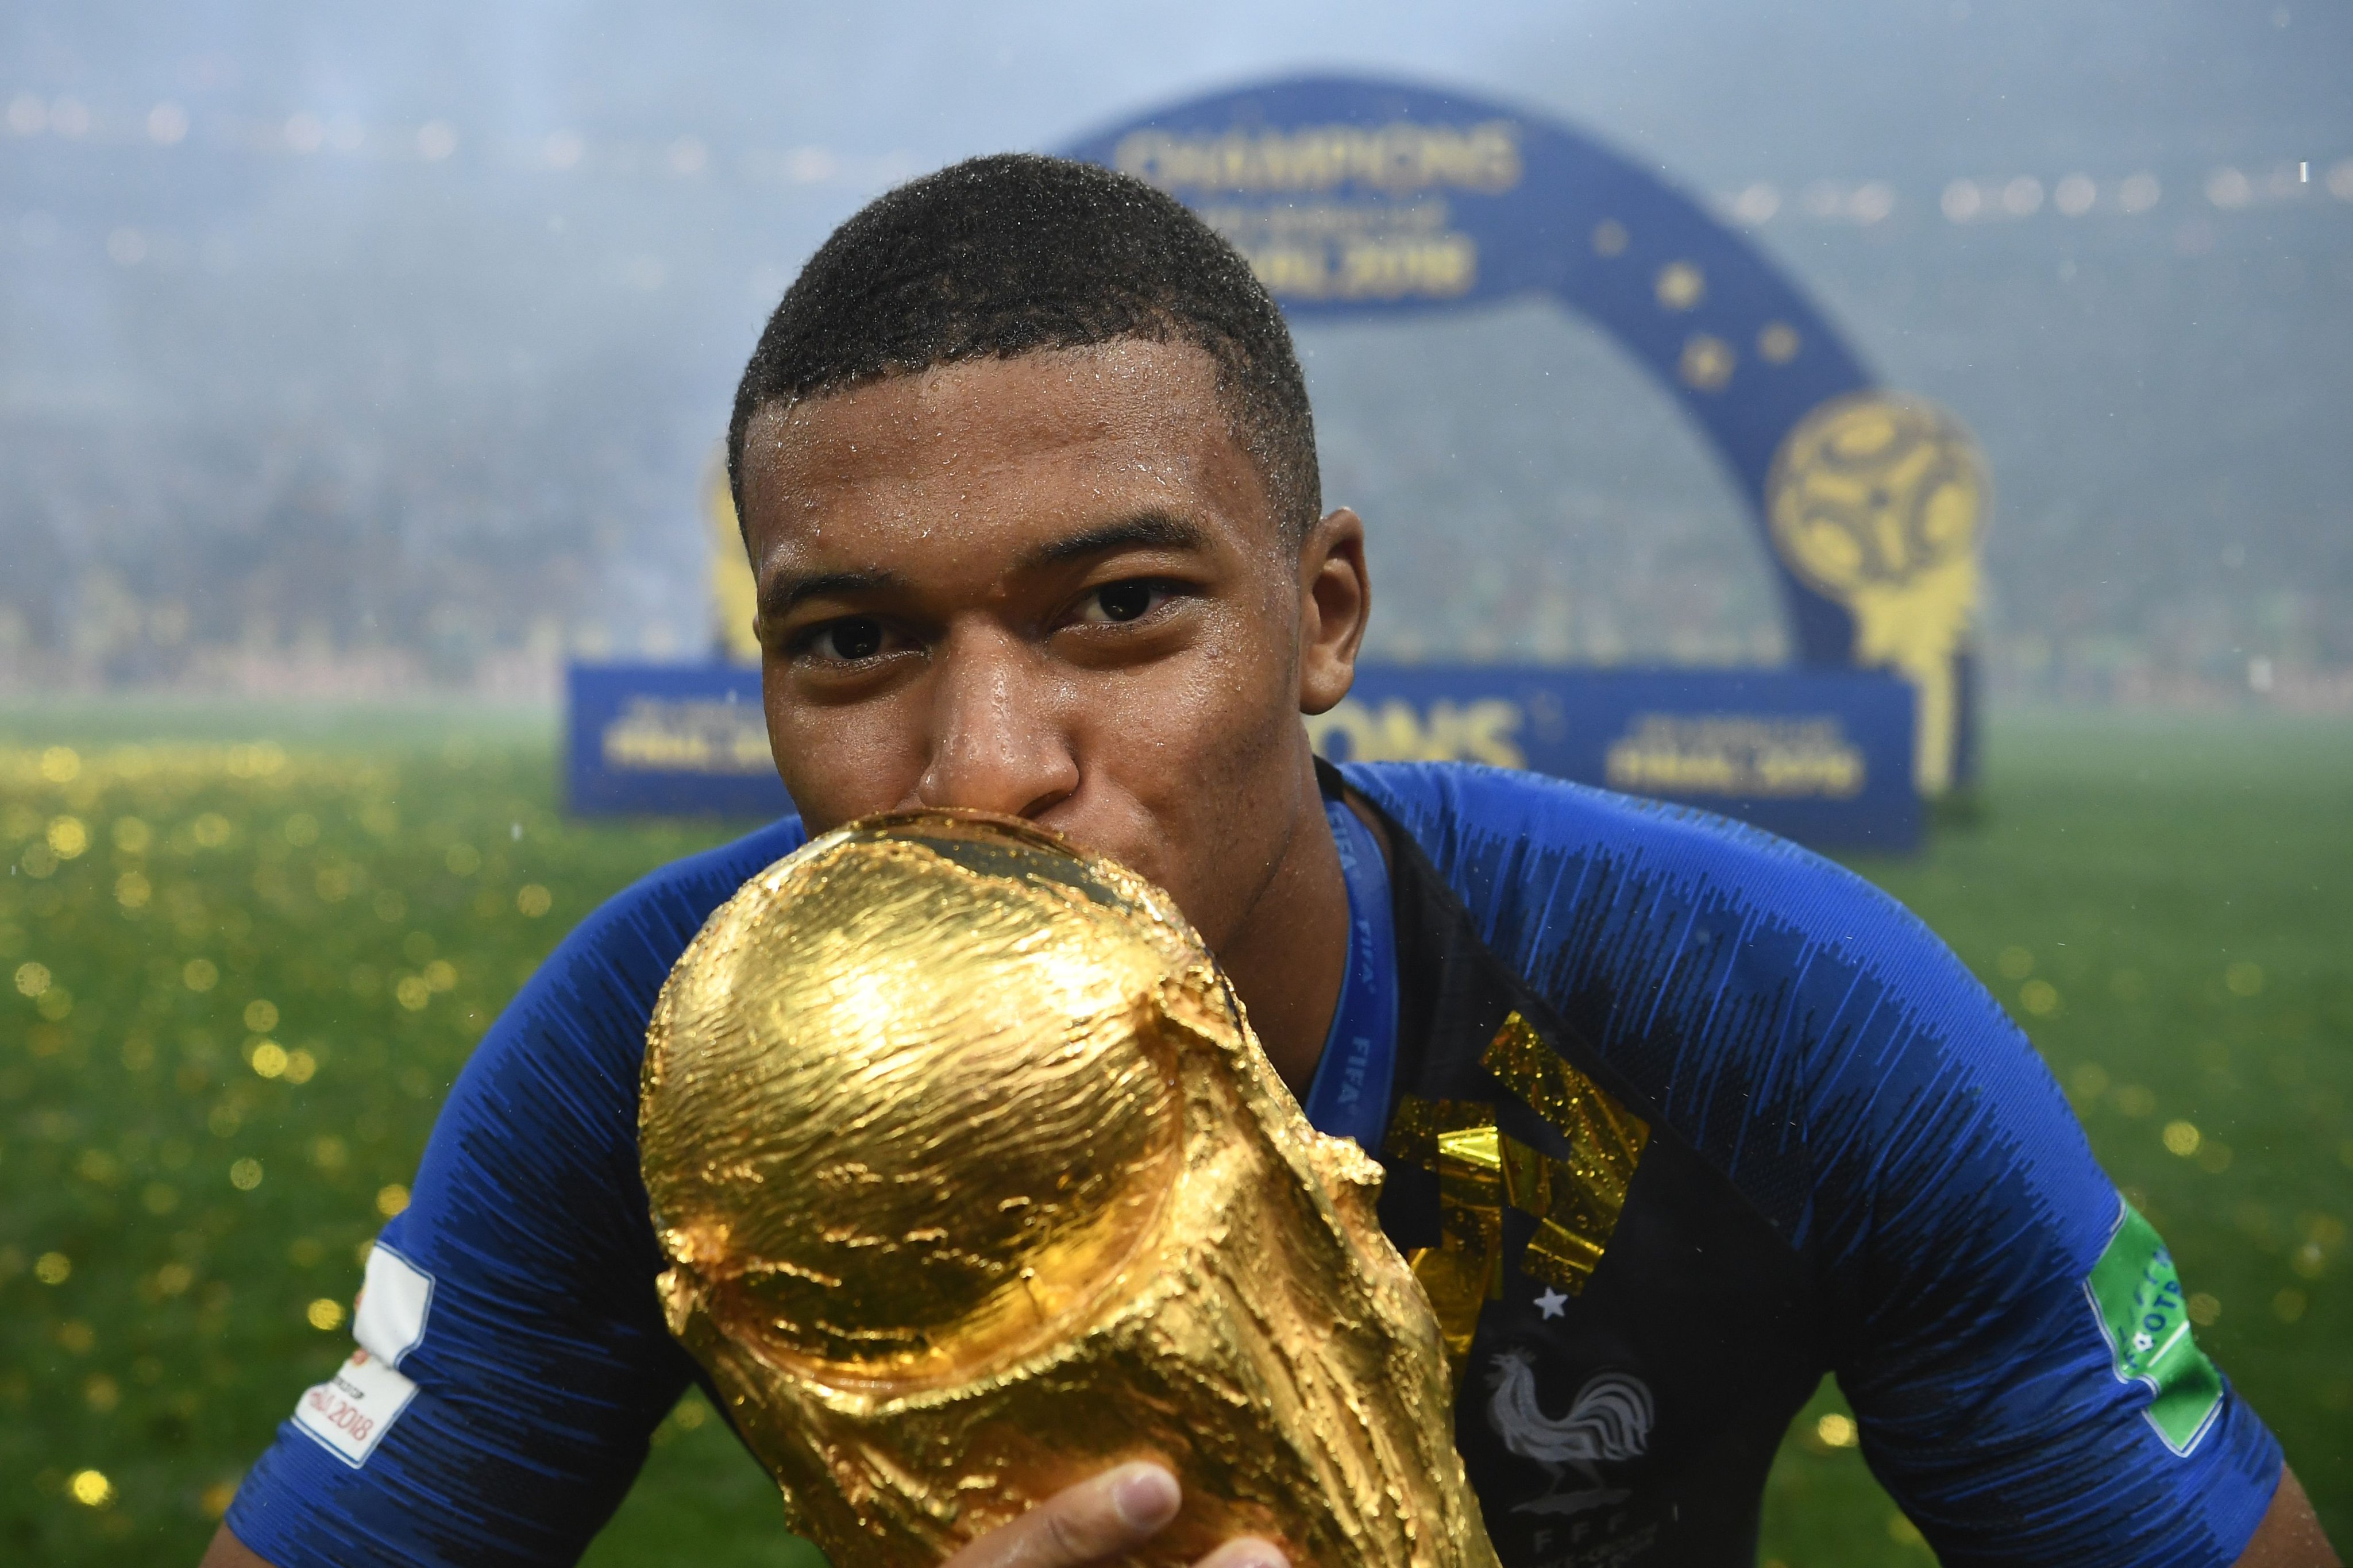 Great players win tournaments and Kylian Mbappe is at that level now, claims Gary Neville